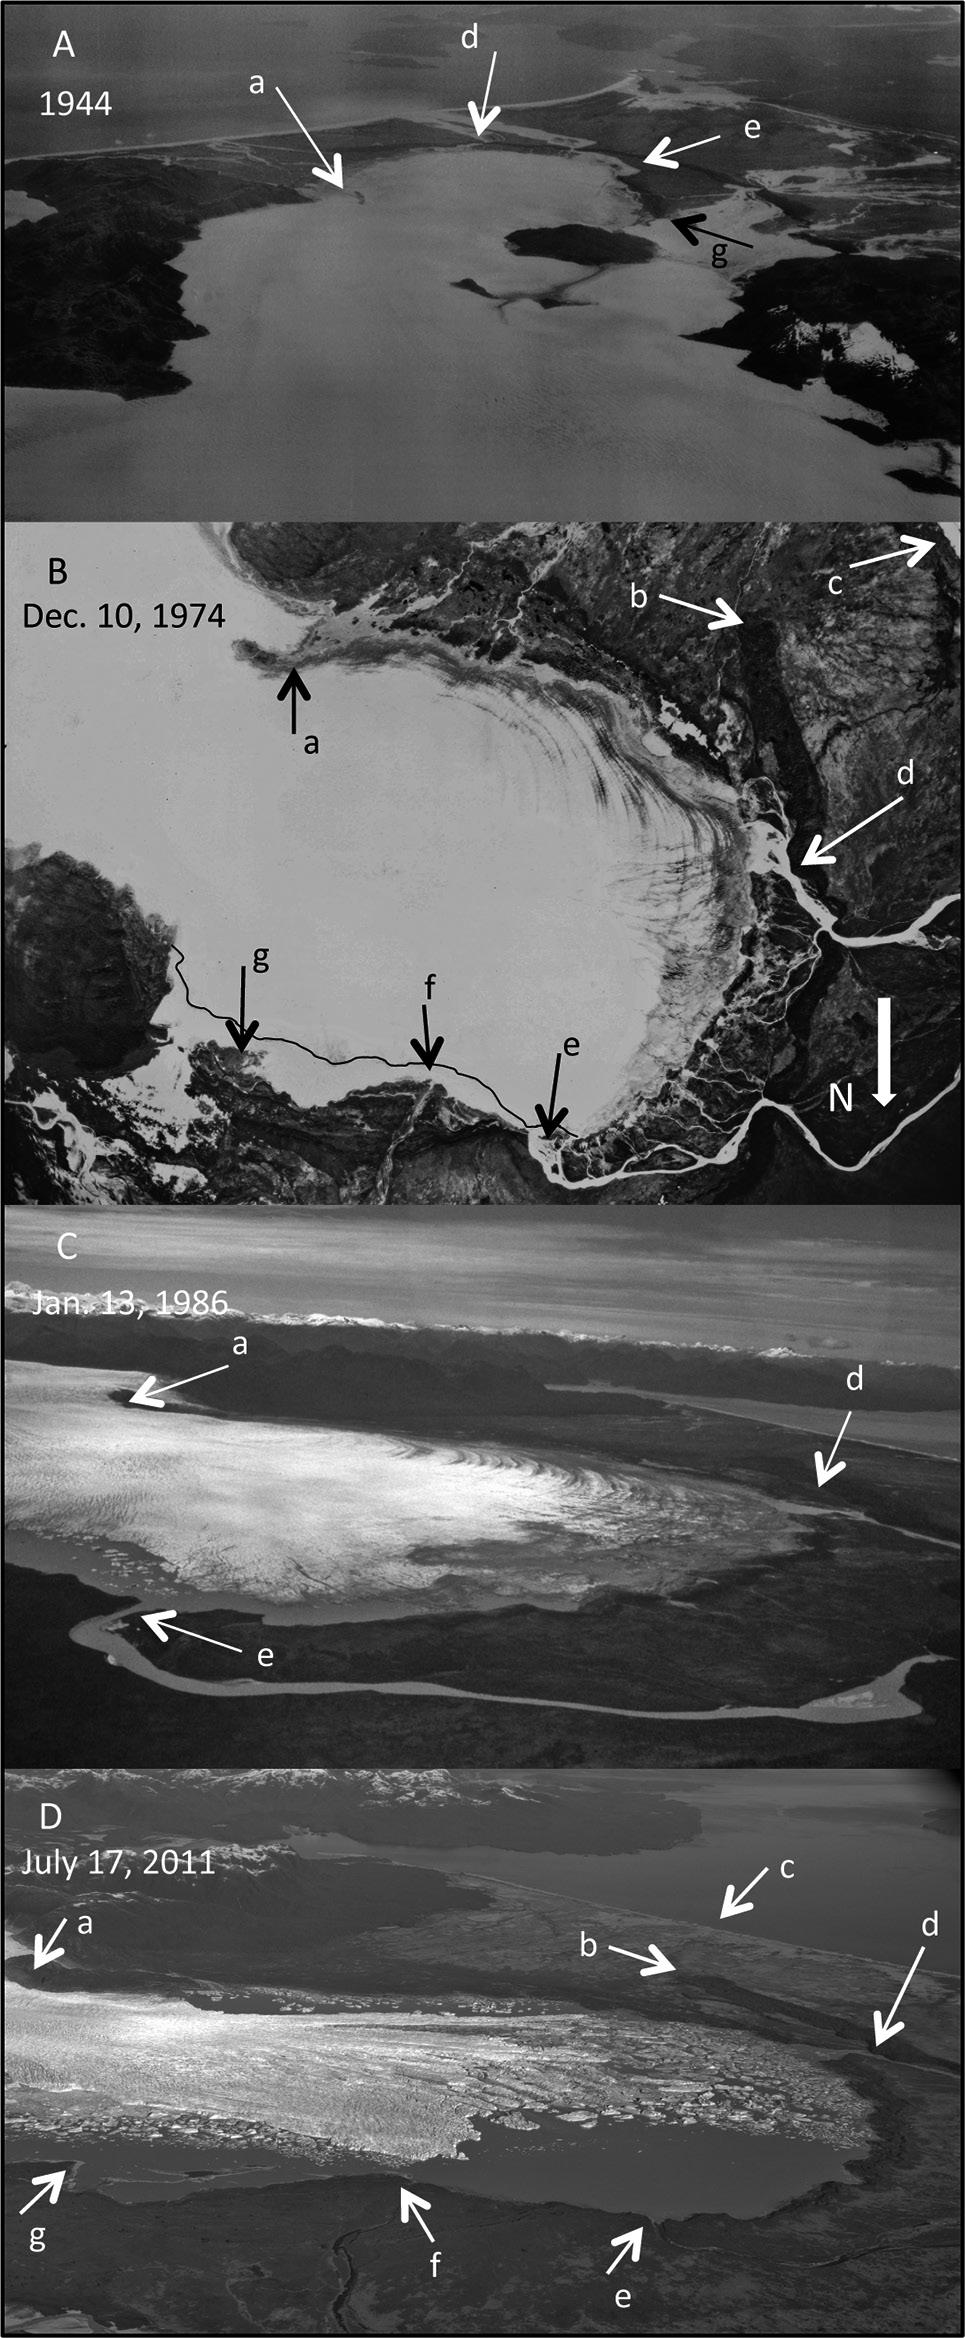 ANIYA Fig. 5. Variations of Gl. San Quintin from 1945 (44/45) to 2011 (July 17). A, trimetrogon; B, Chilean IGM. Arrows a to g indicate the same, corresponding spots. The width of the lake is ca.